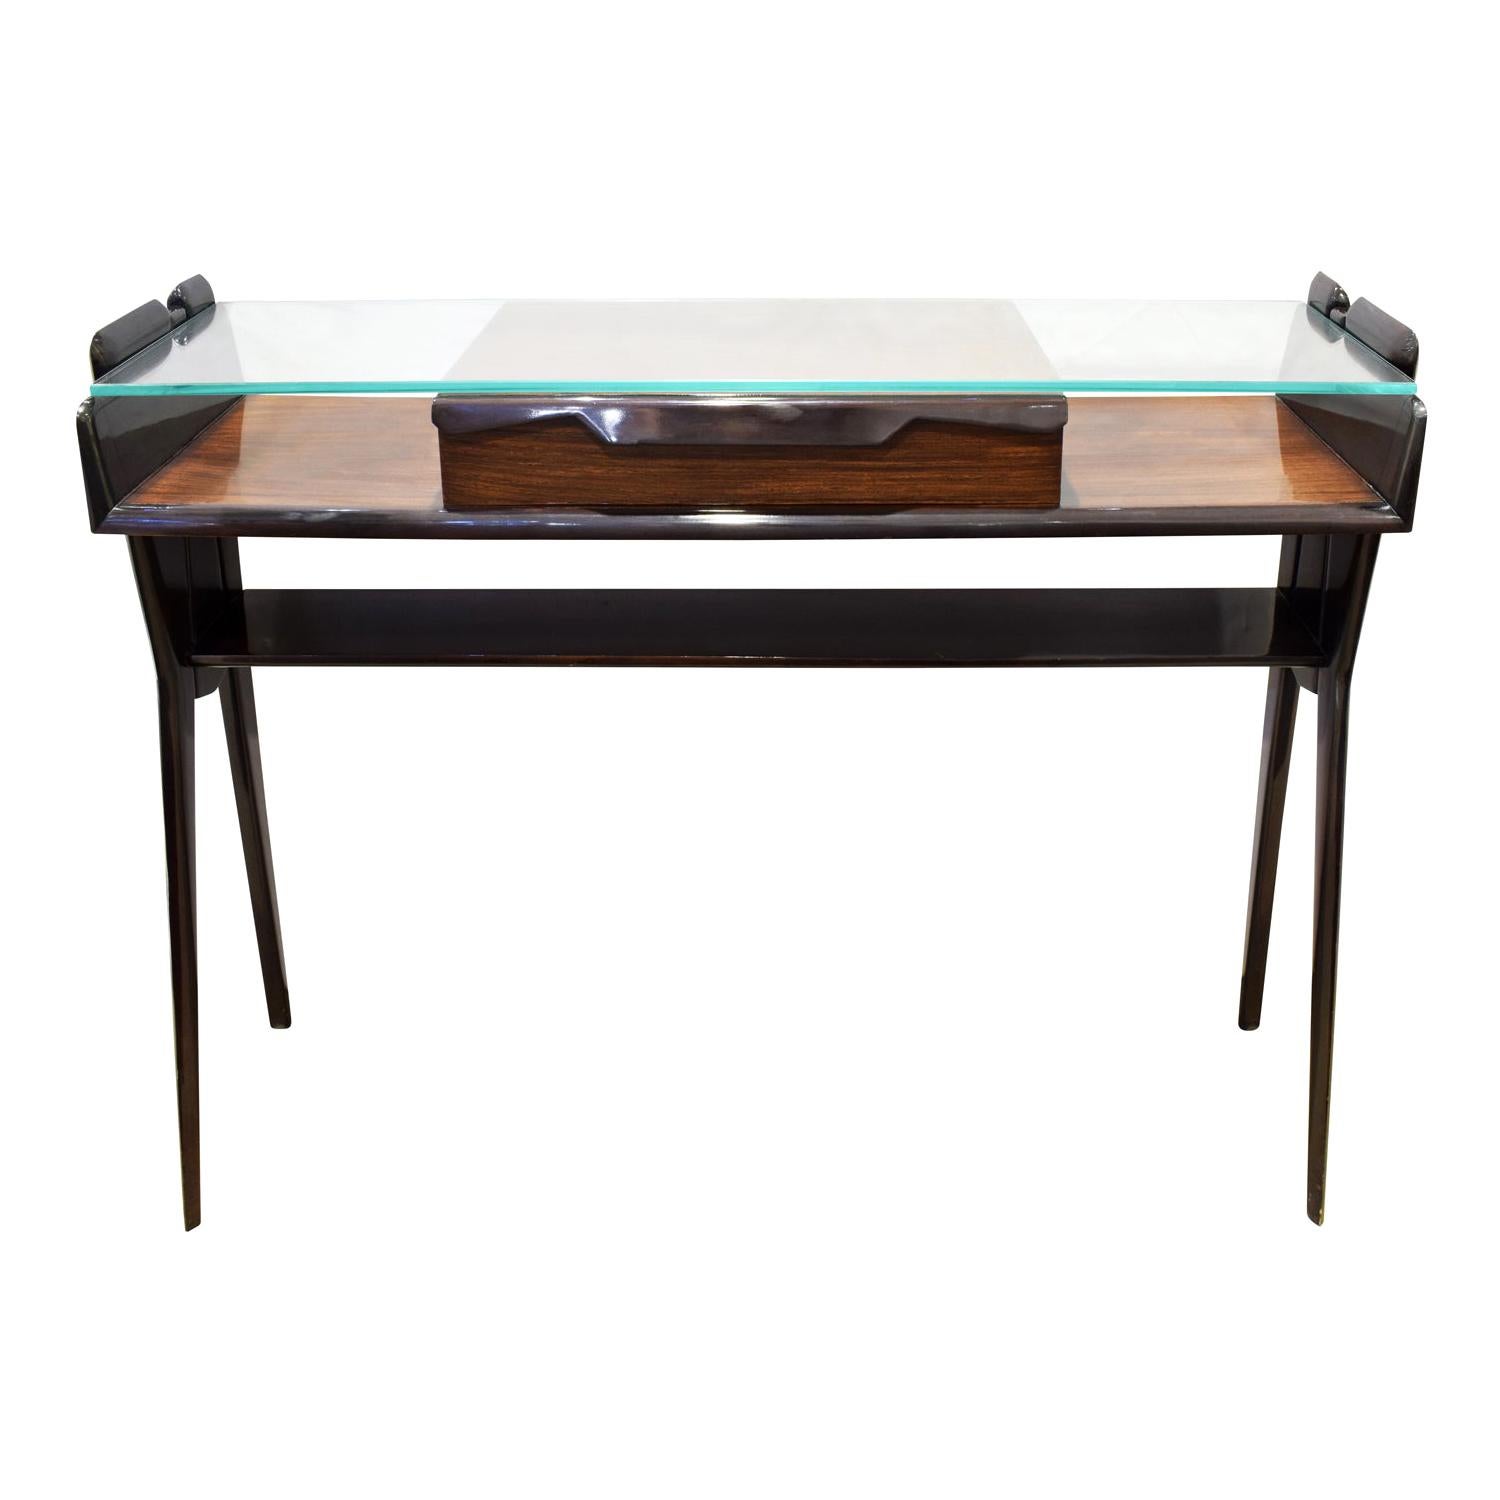 Sculptural Console Table in Dark Walnut with Glass Top, 1950s